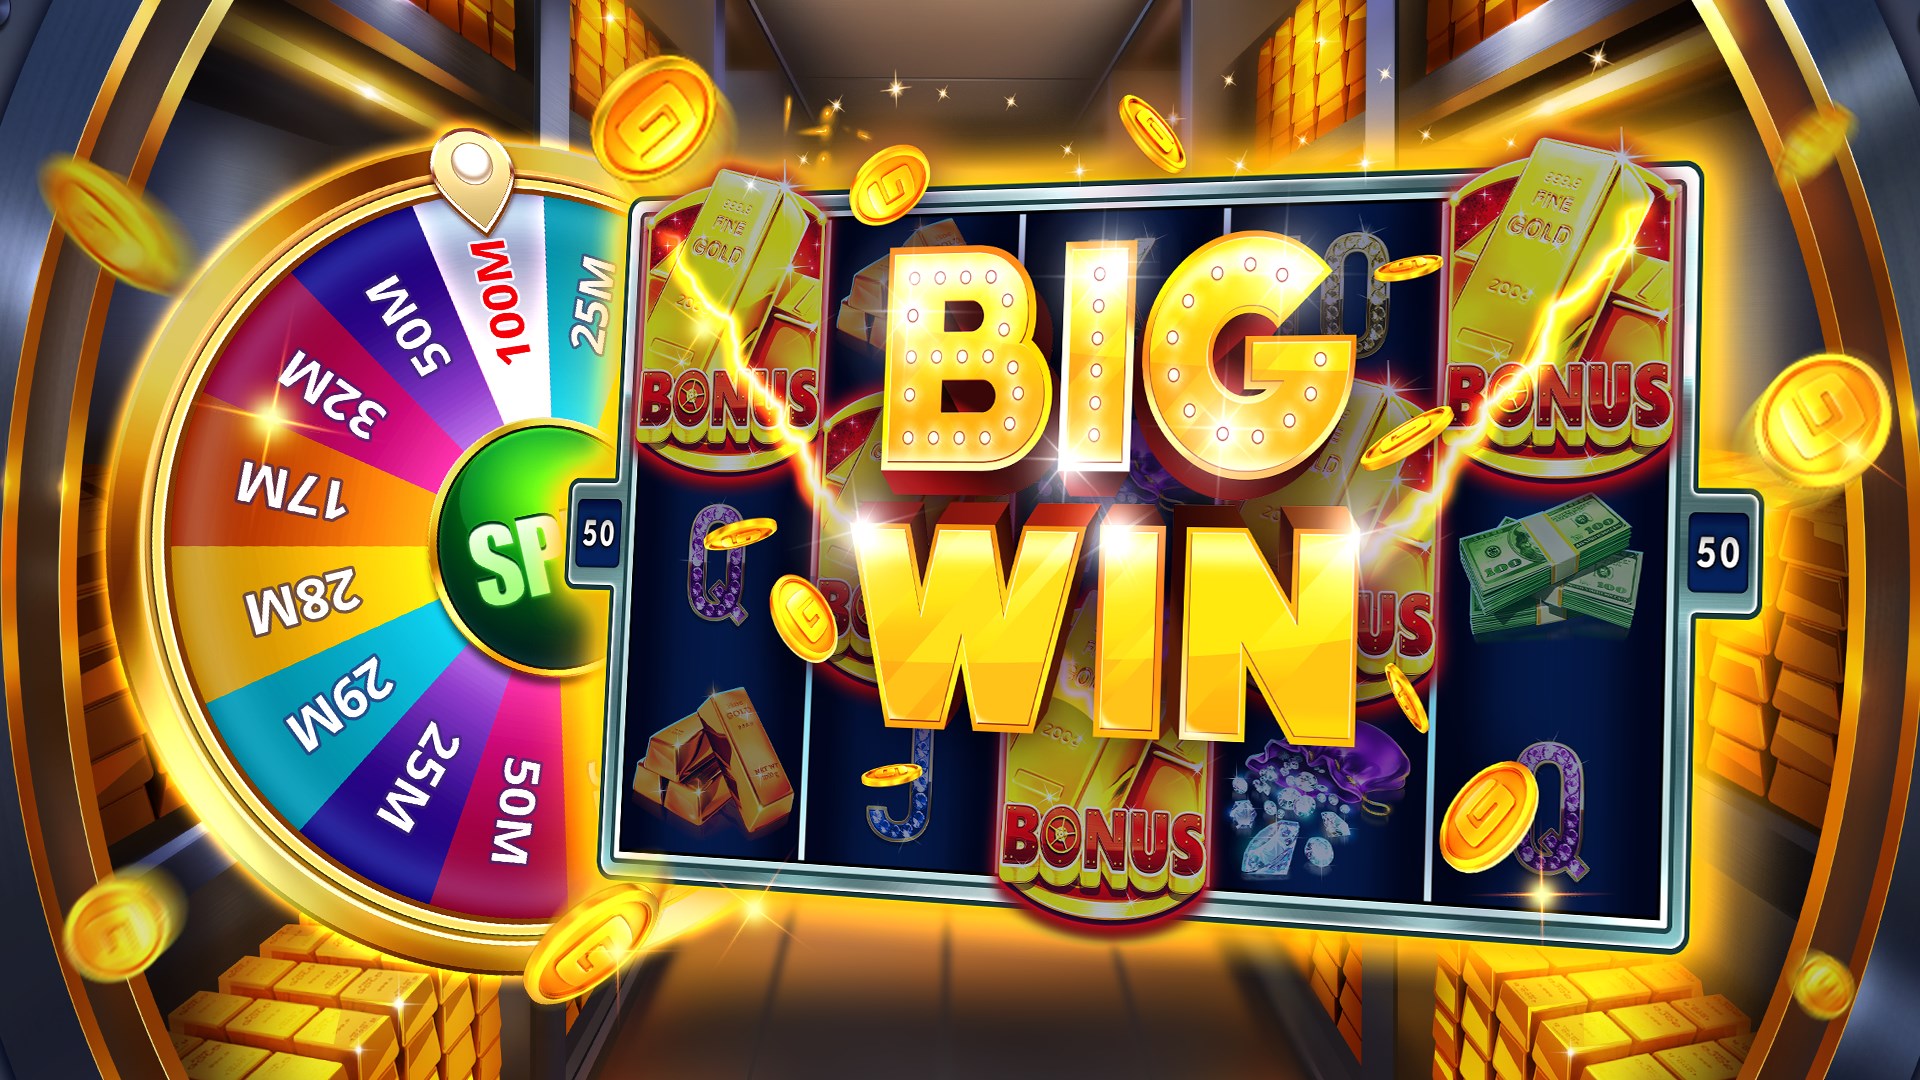 Online slot casino games can bring you the jackpot